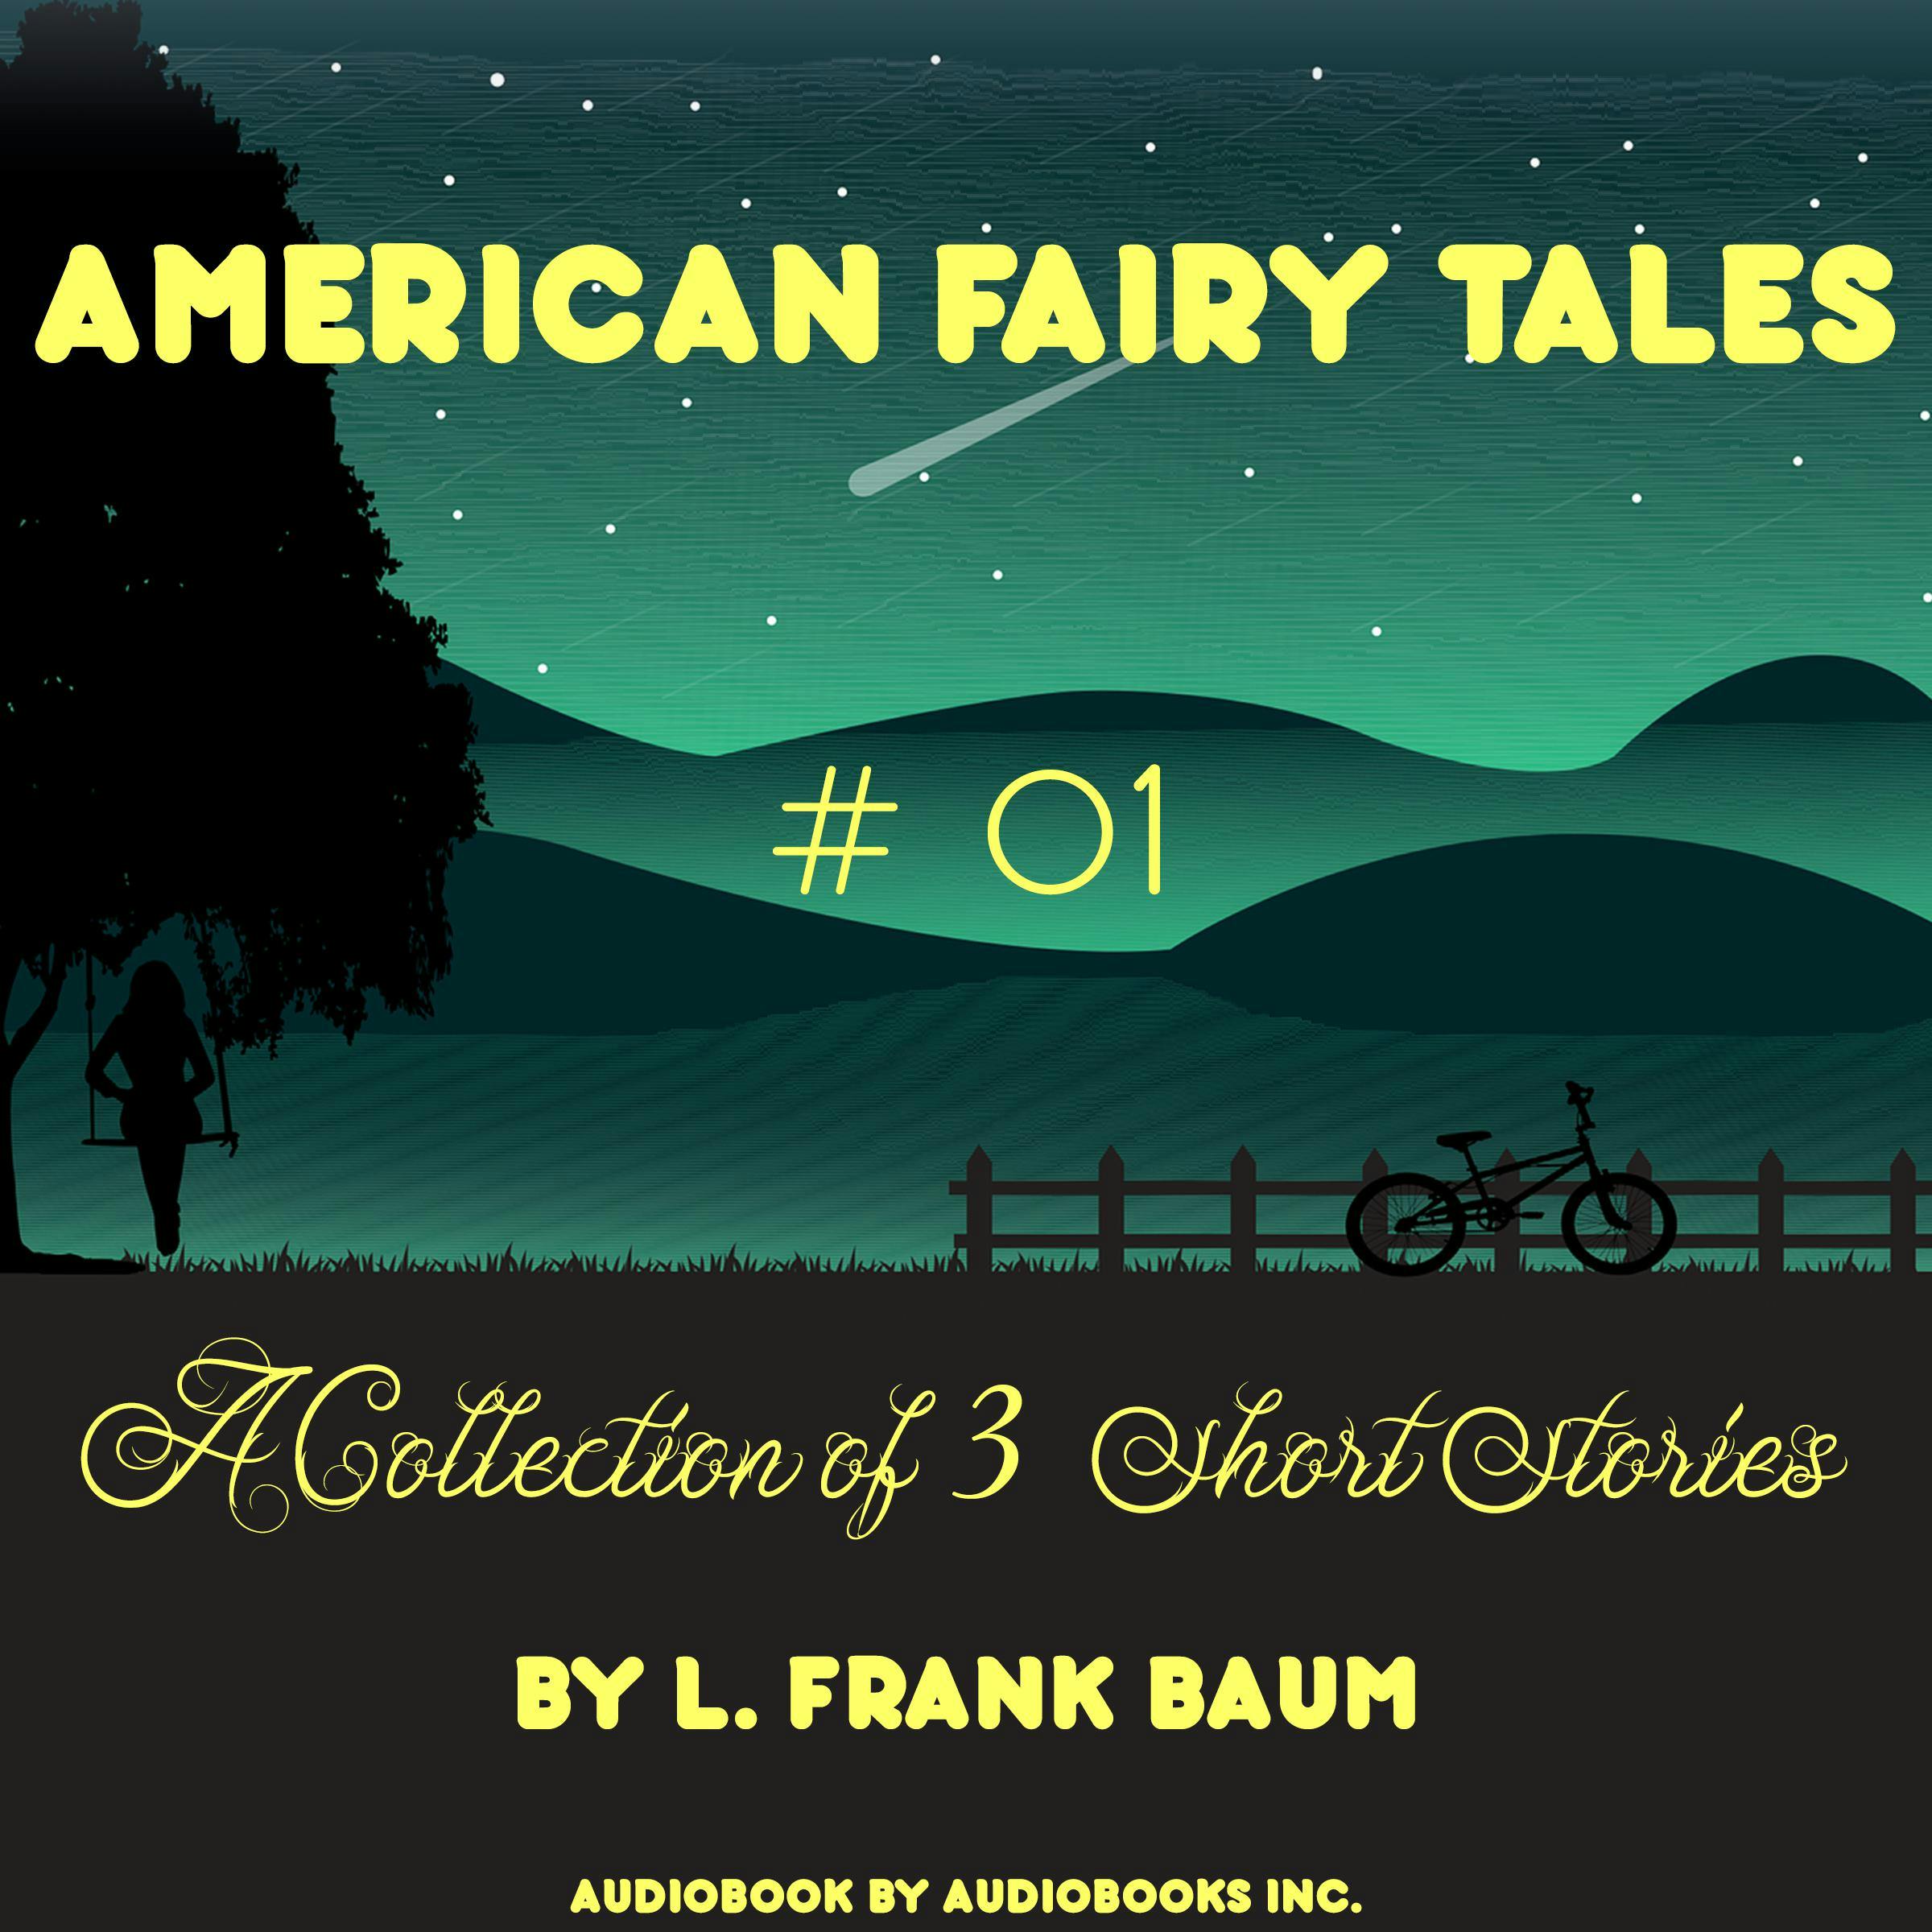 American Fairy Tales, A Collection of 3 Short Stories, # 01 - Audio Books Inc., L. Frank Baum